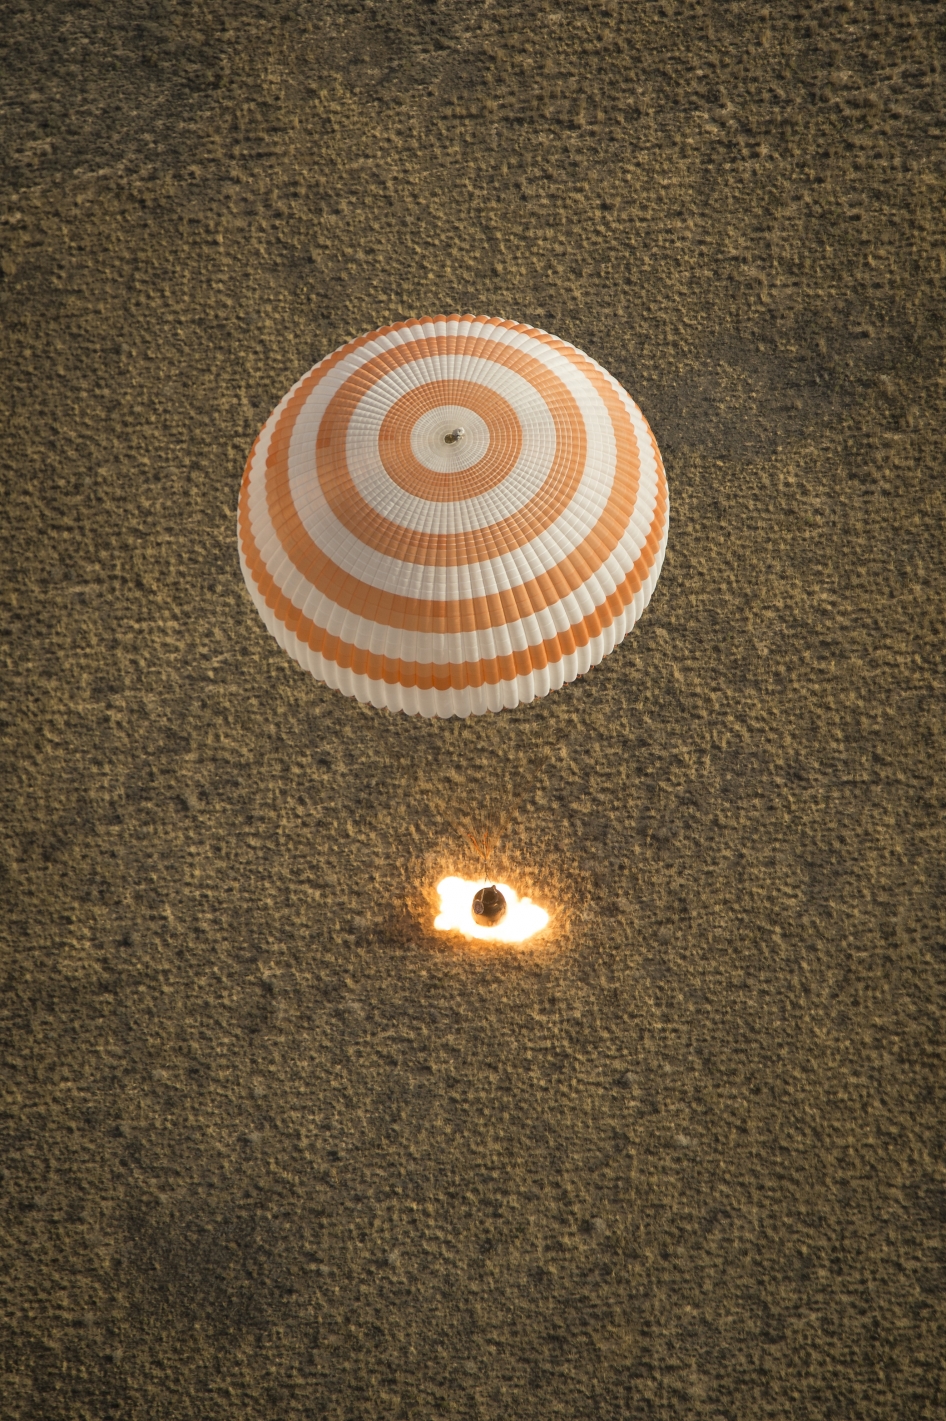 Astronauts Arrive Home In A Brilliant Ball Of Fire